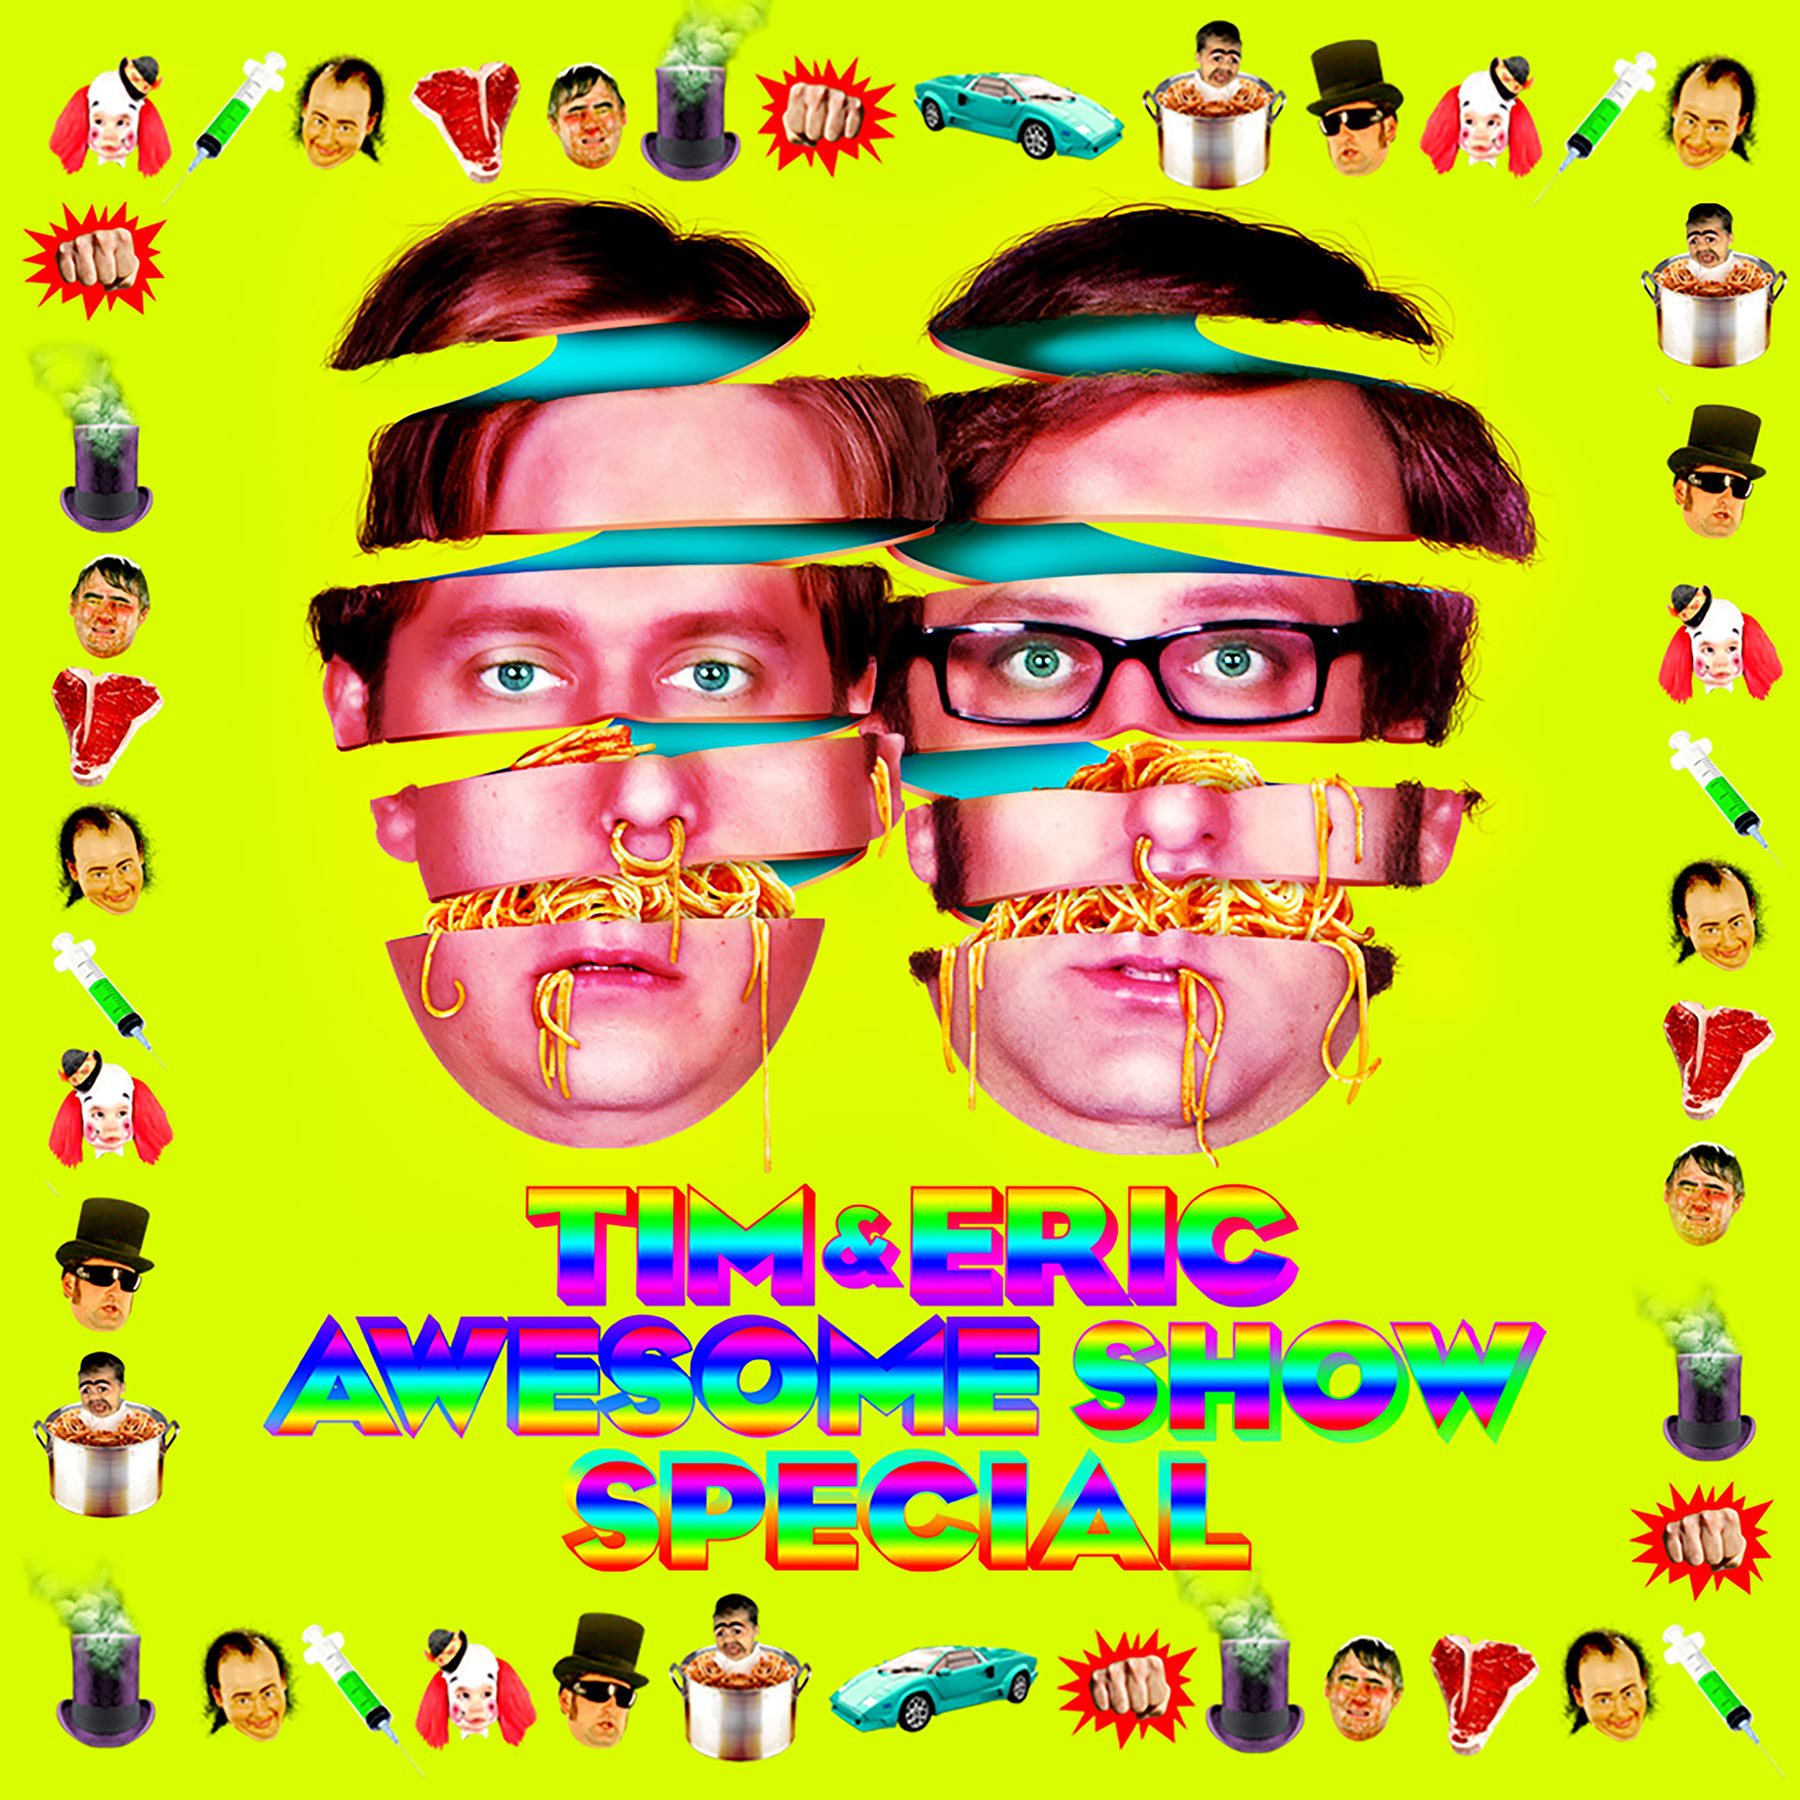 A <i></noscript>Tim and Eric Awesome Show, Great Job!</i> 10th Anniversary Special Is Coming to Adult Swim” title=”teasr_image2-1502393128″ data-original-id=”253114″ data-adjusted-id=”253114″ class=”sm_size_full_width sm_alignment_center ” data-image-source=”video_screenshot” /></p><div class=